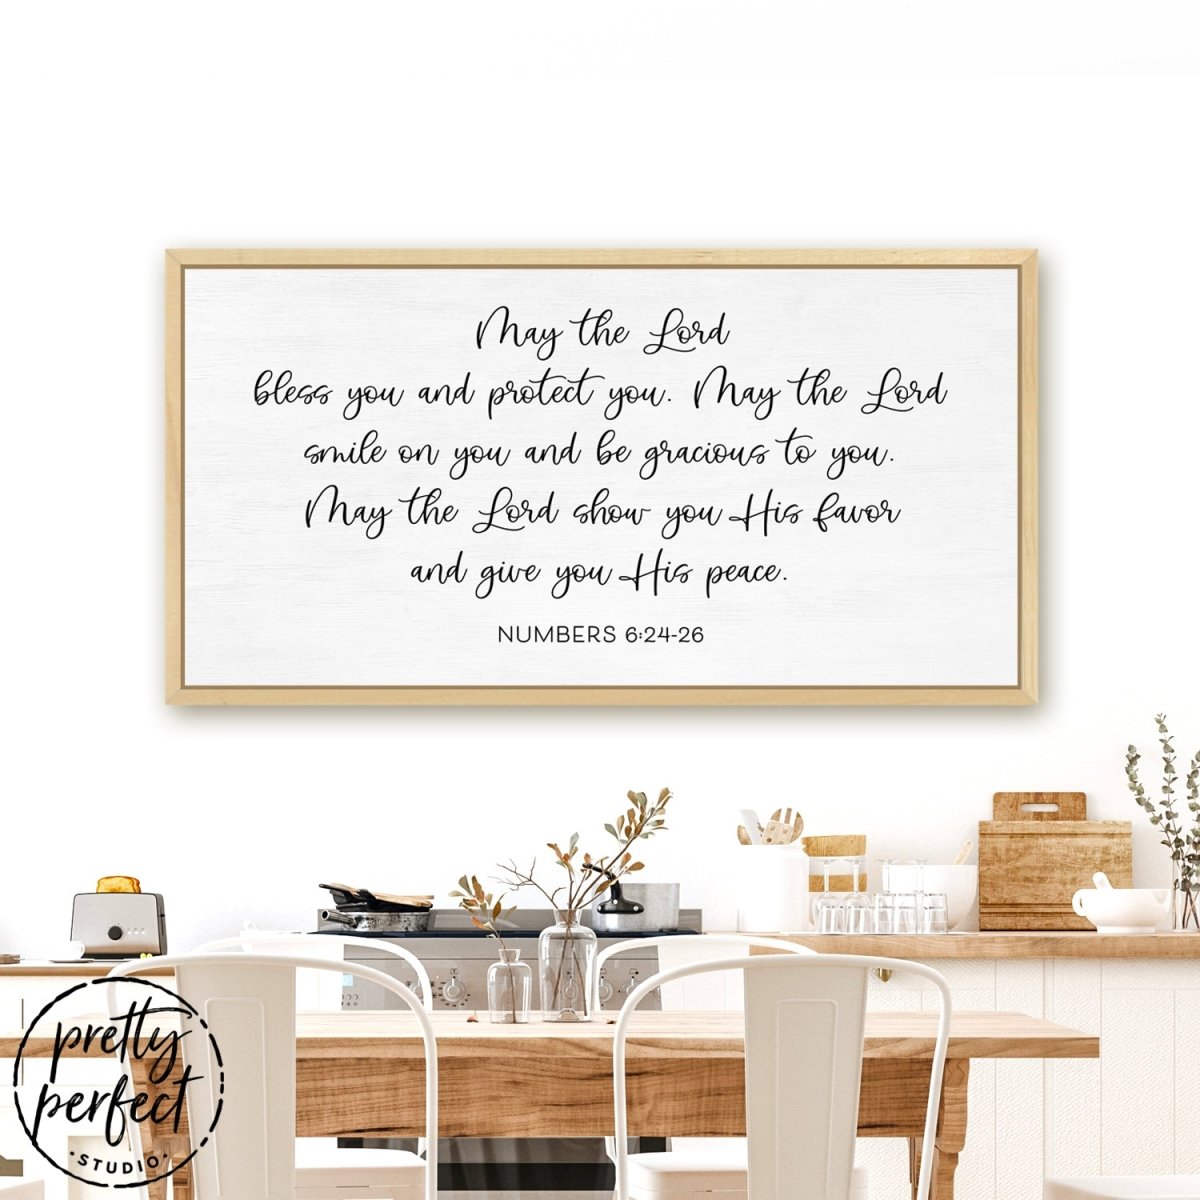 May The Lord Bless You Sign Hanging on Wall in Dining Room – Pretty Perfect Studio